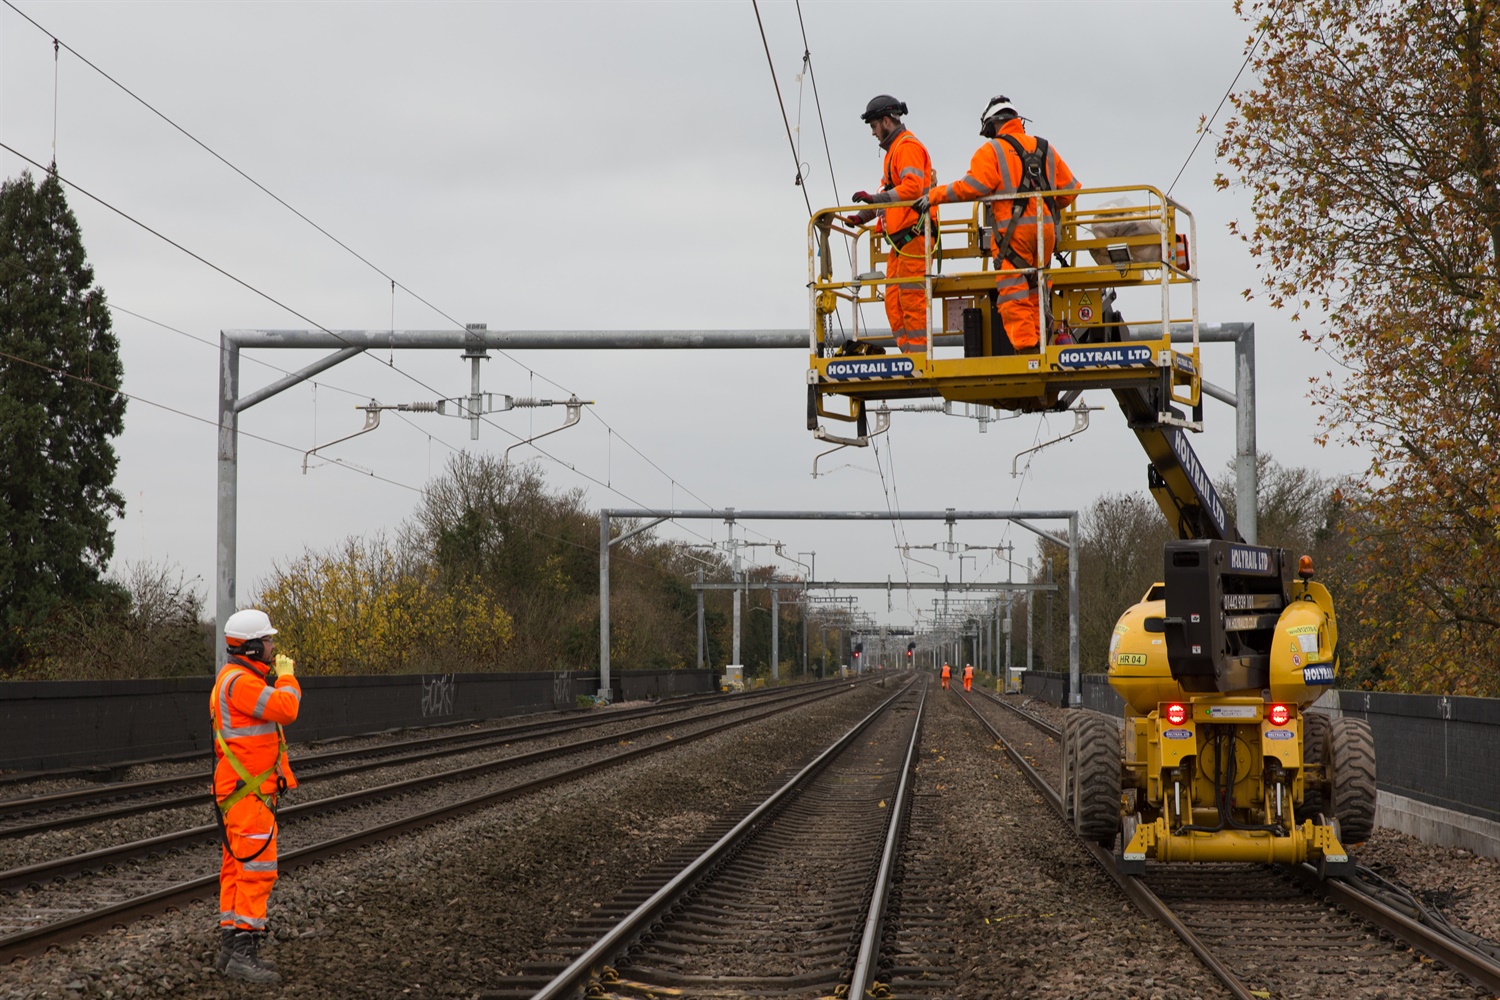 Crossrail moves forward with completion of electrification on major route